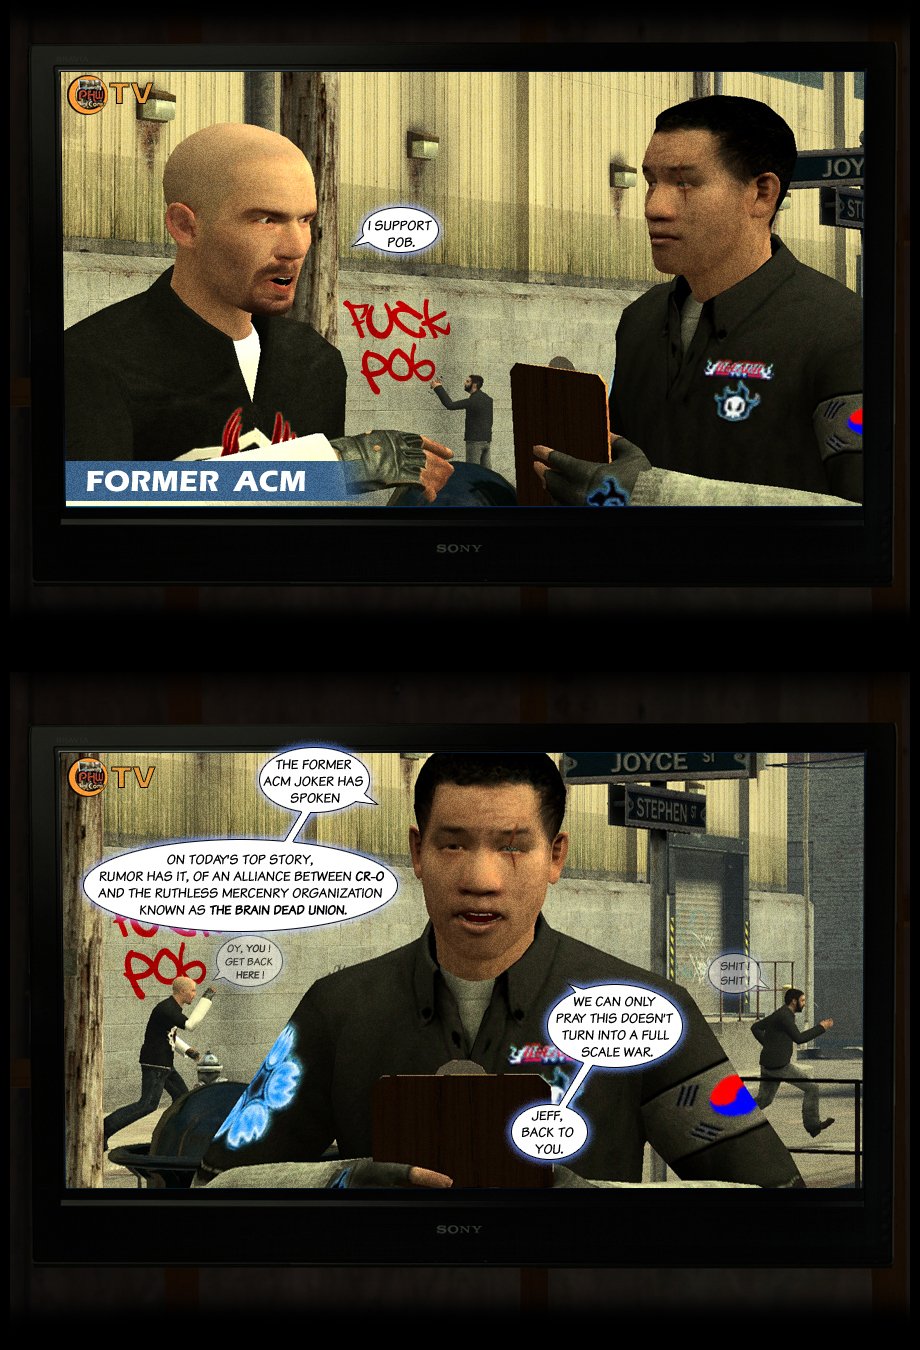 On TV, Nexus Elite is interviewing PHW member and former Approved Comic Maker The Joker, who declares that he supports PoB. Behind them, FZE is making a graffiti on a wall that says Fuck PoB. Nexus turns to the camera and says that former ACM Joker has spoken and adds that today's top story is the rumor of an alliance between Cheap Rip-Off and the ruthless mercenary organization known as the Brain Dead Union. Behind him, Joker angrily chases after FZE. Nexus concludes that they can only pray this doesn't turn into a full scale war, and turns the emission back to Jeff. End of part 7.